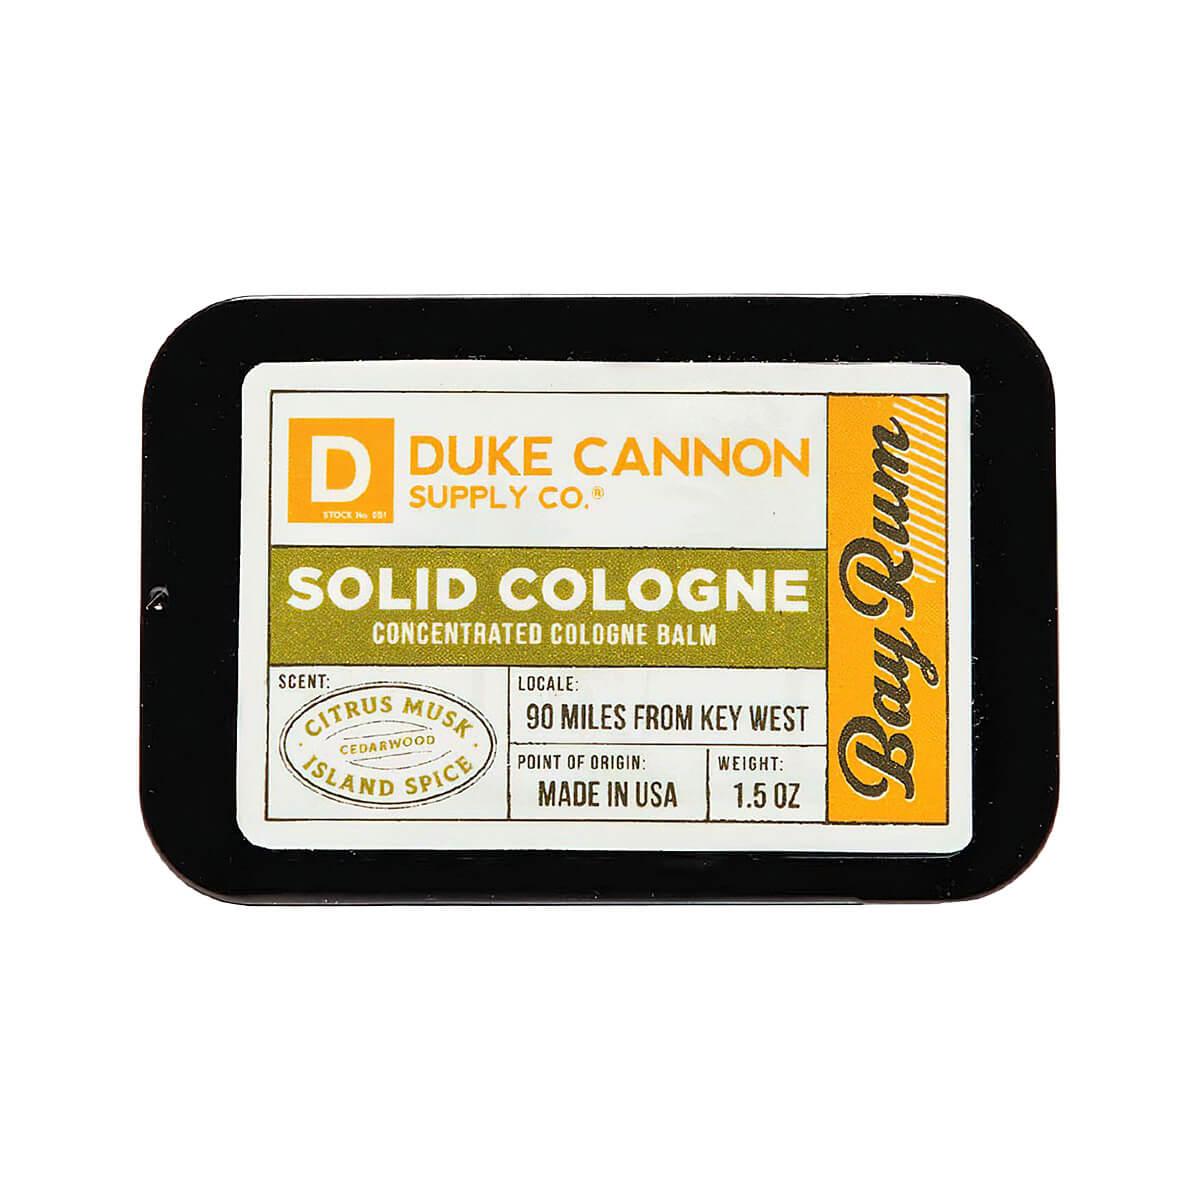  Bay Rum Solid Cologne